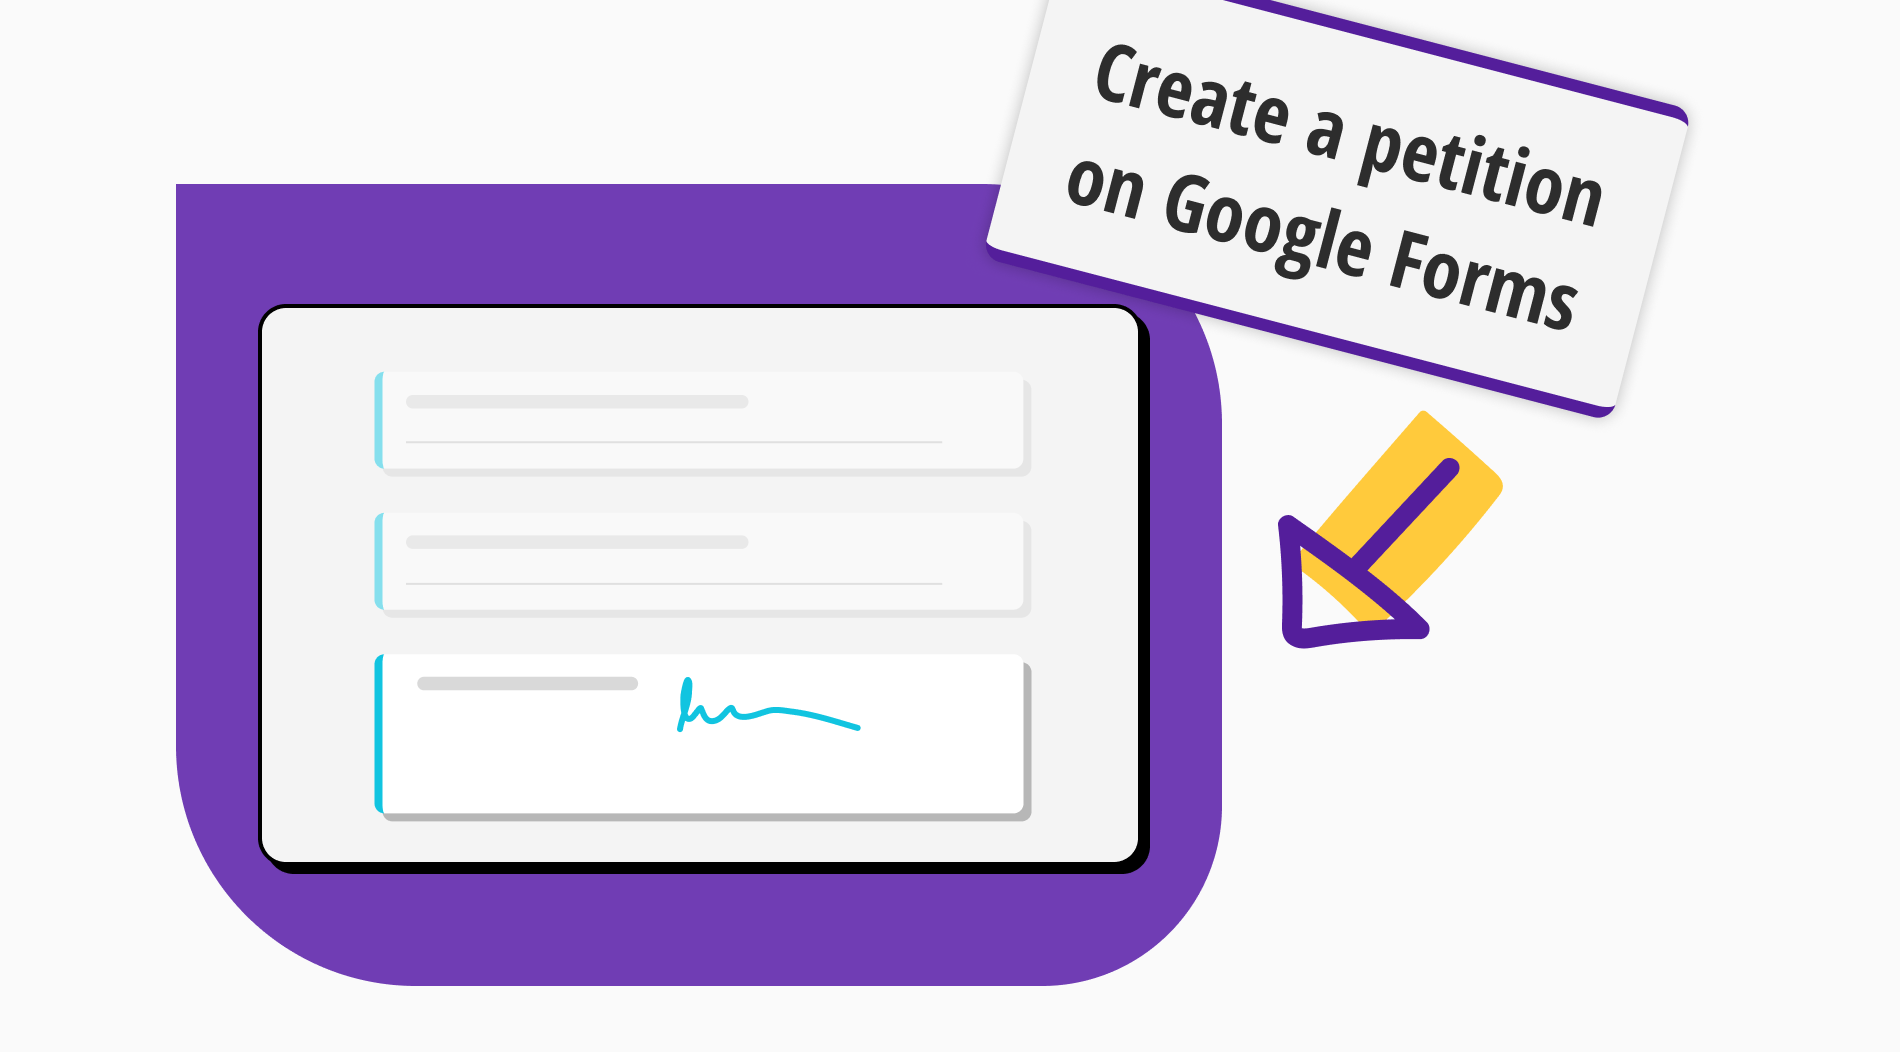 How to create a petition on Google Forms (step by step)